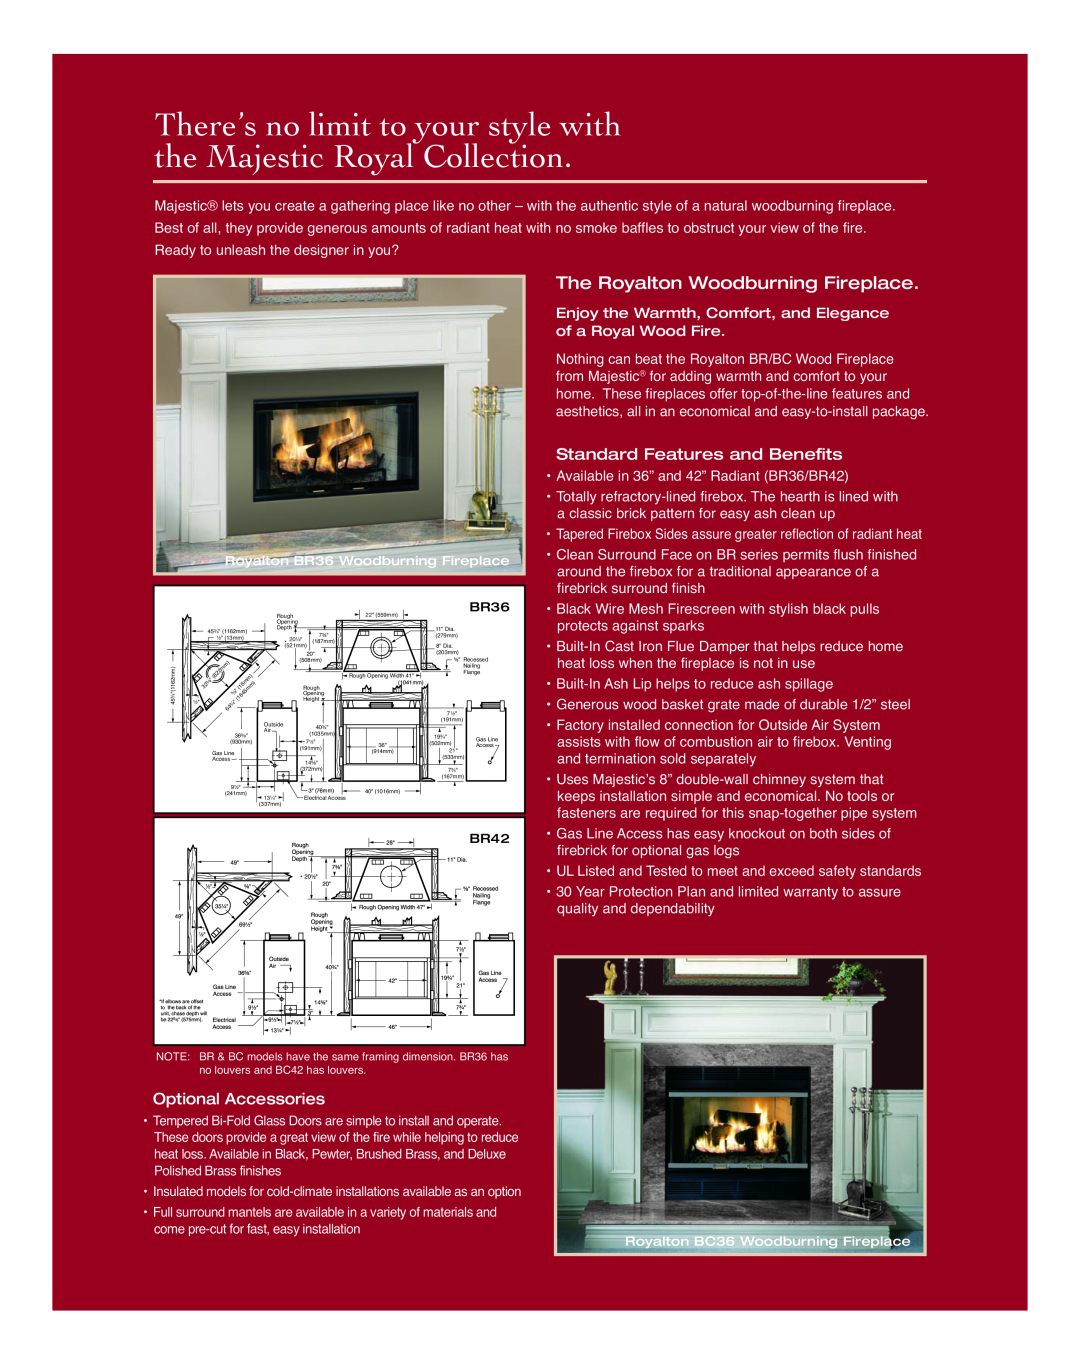 Vermont Casting WMC36 The Royalton Woodburning Fireplace, Enjoy the Warmth, Comfort, and Elegance, of a Royal Wood Fire 